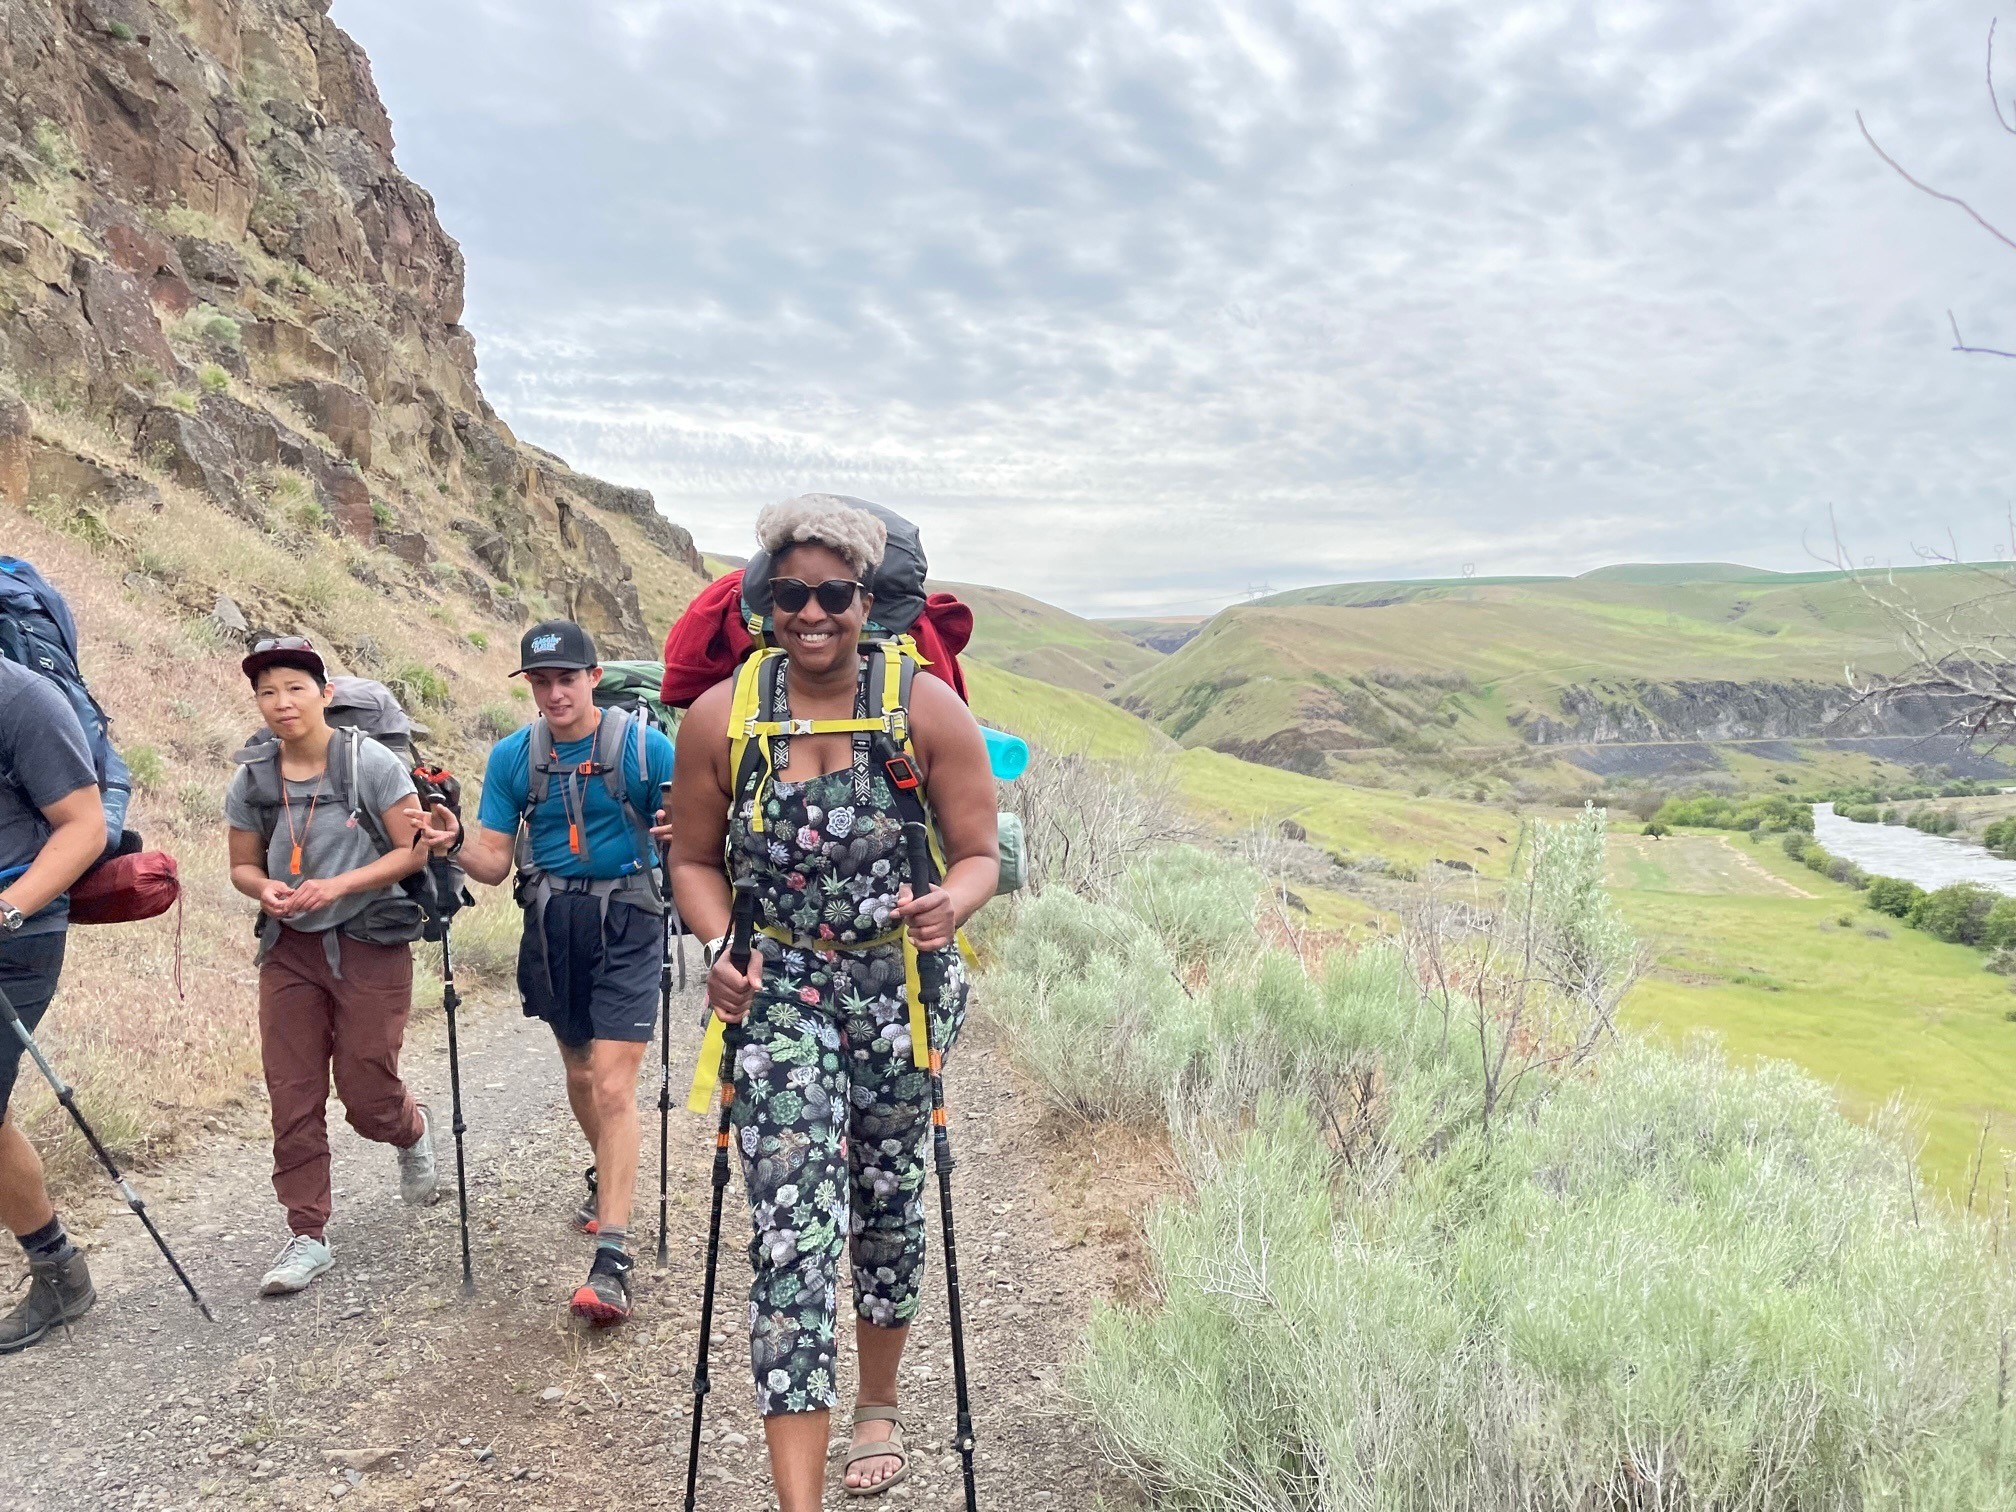 A group of people walk down a trail with backpacks on. The person in the center smiles at the camera.